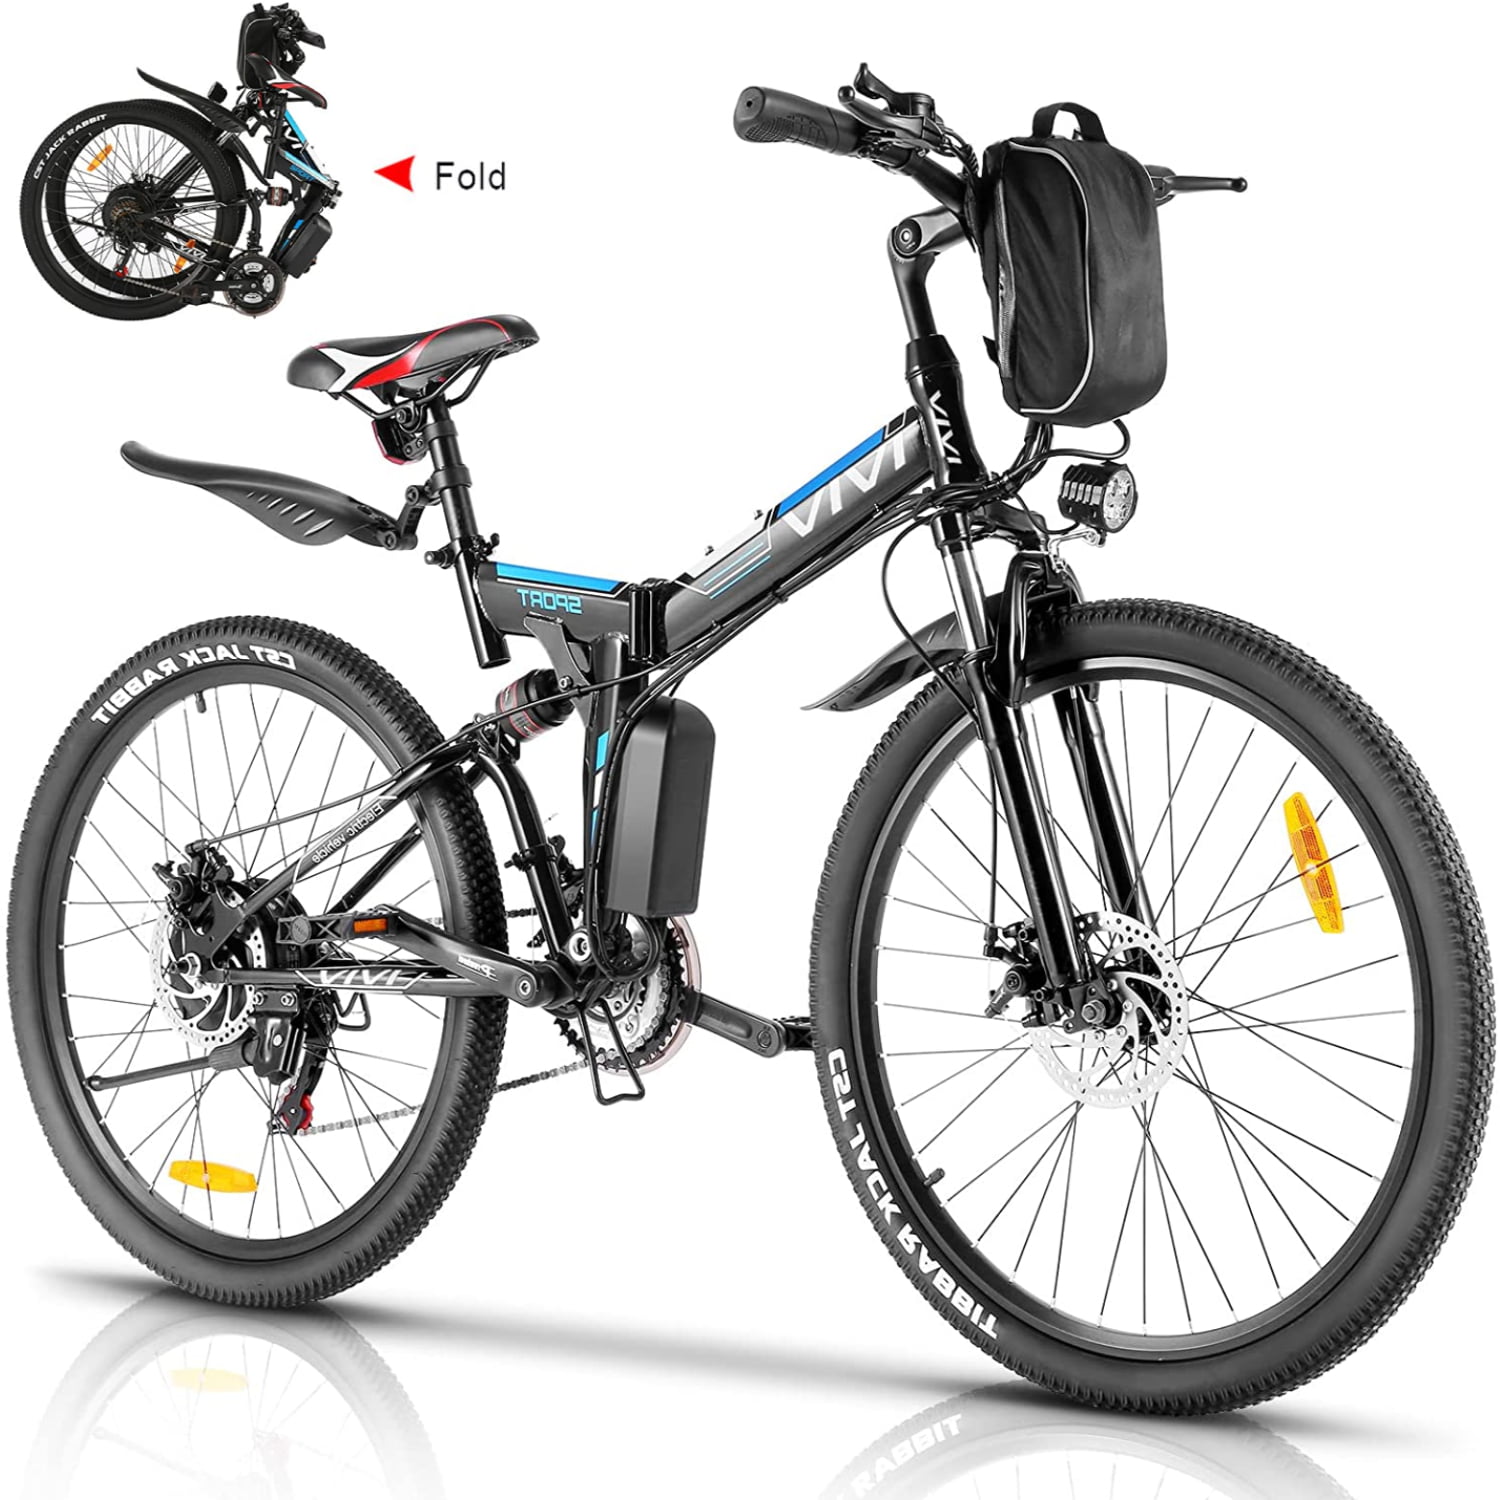 Details about   350W 26" Electric Bike Commuting Bicycle 36V Removeable LI-Battery City\E-Bikes/ 